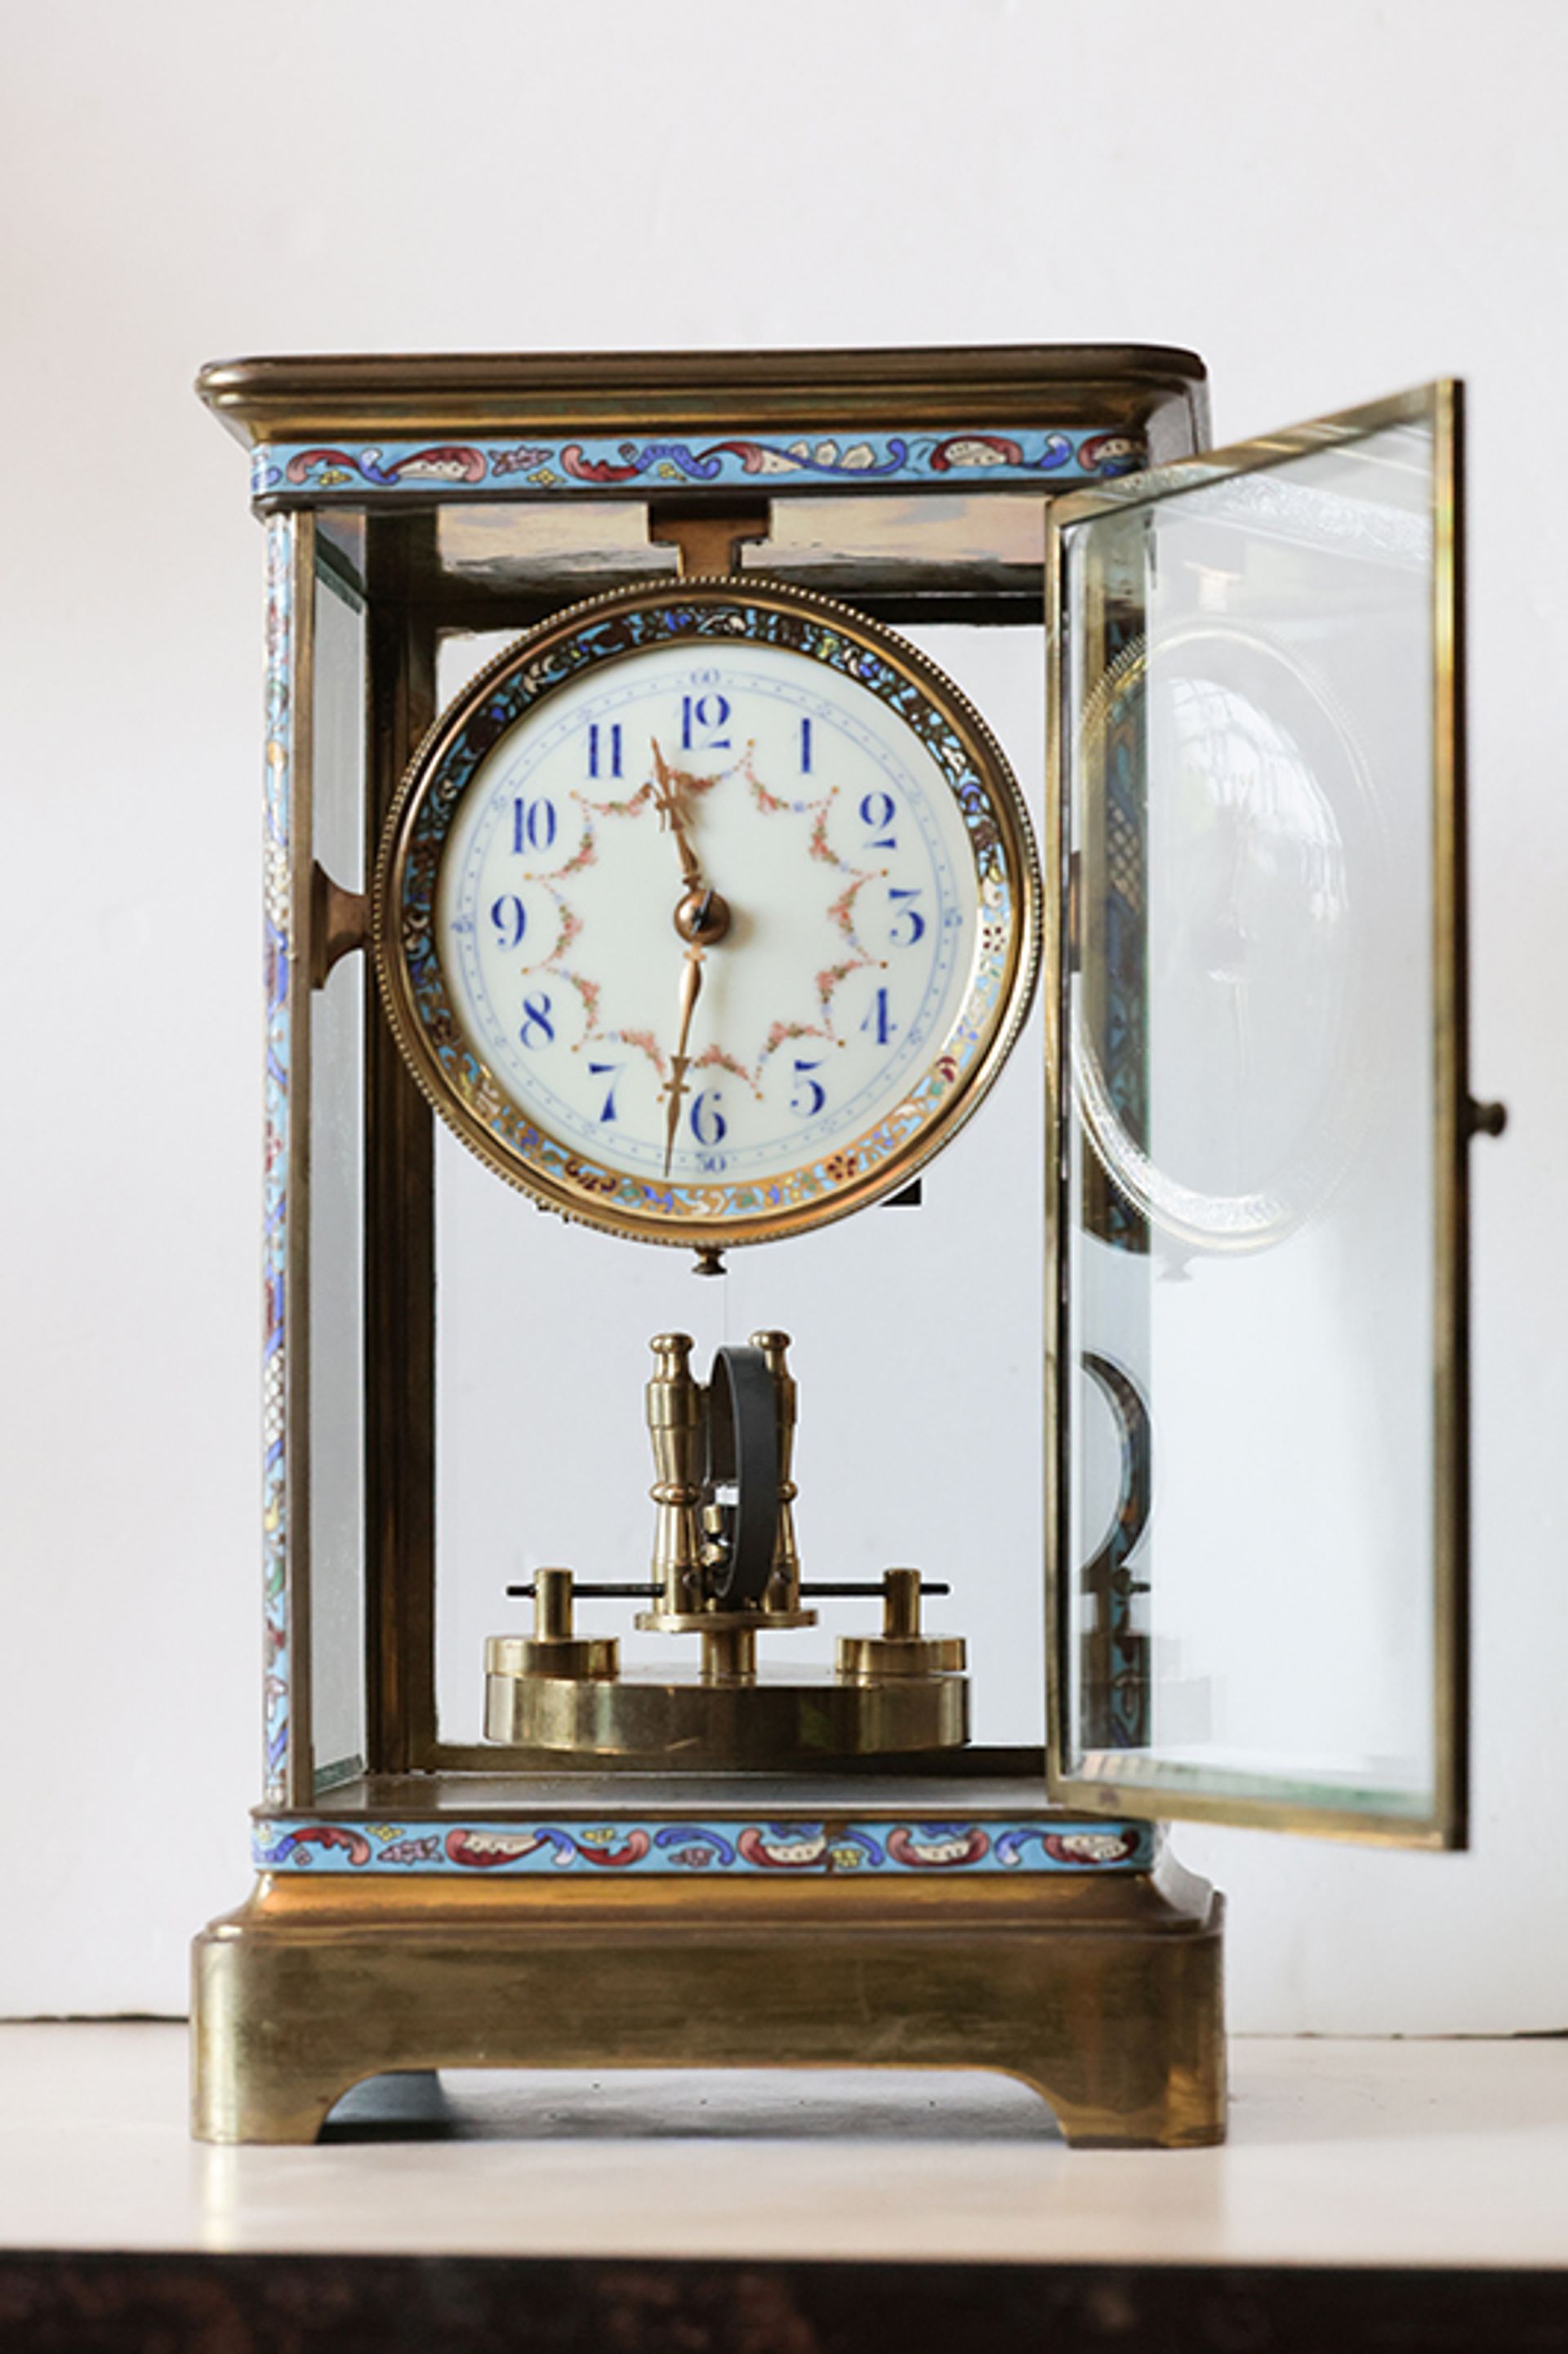 A 400-day clock made by Philipp Hauck around 1907. It is fitted with a bimetallic temperature compensating disc pendulum. The case was made in France.